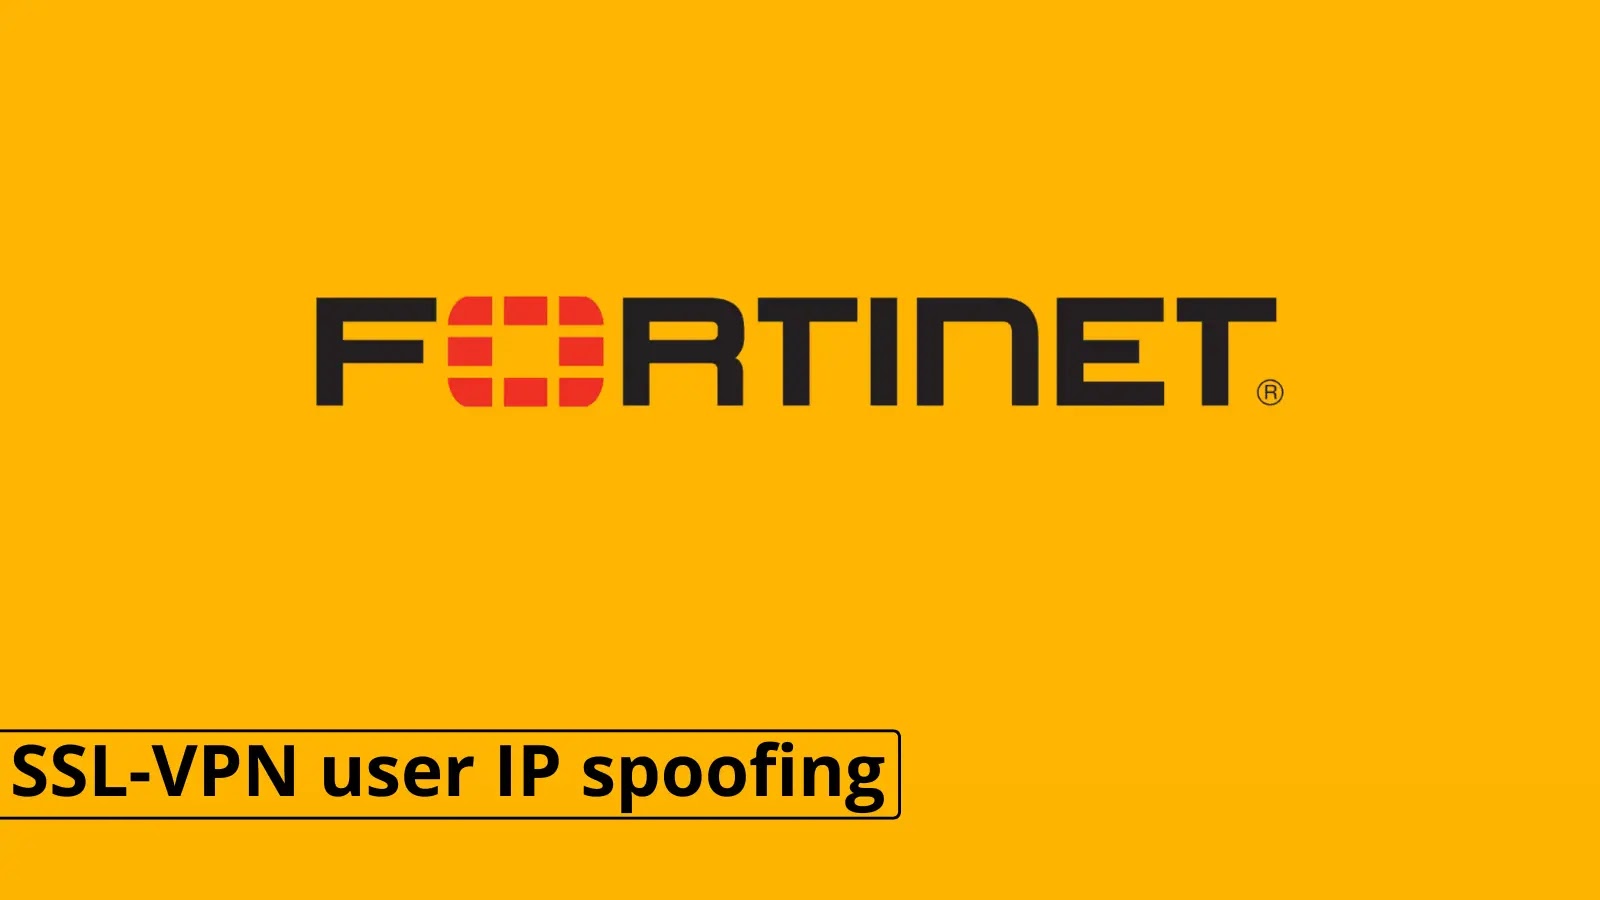 FortiOS & FortiProxy SSL-VPN Flaw Allows IP Spoofing via Malicious Packets